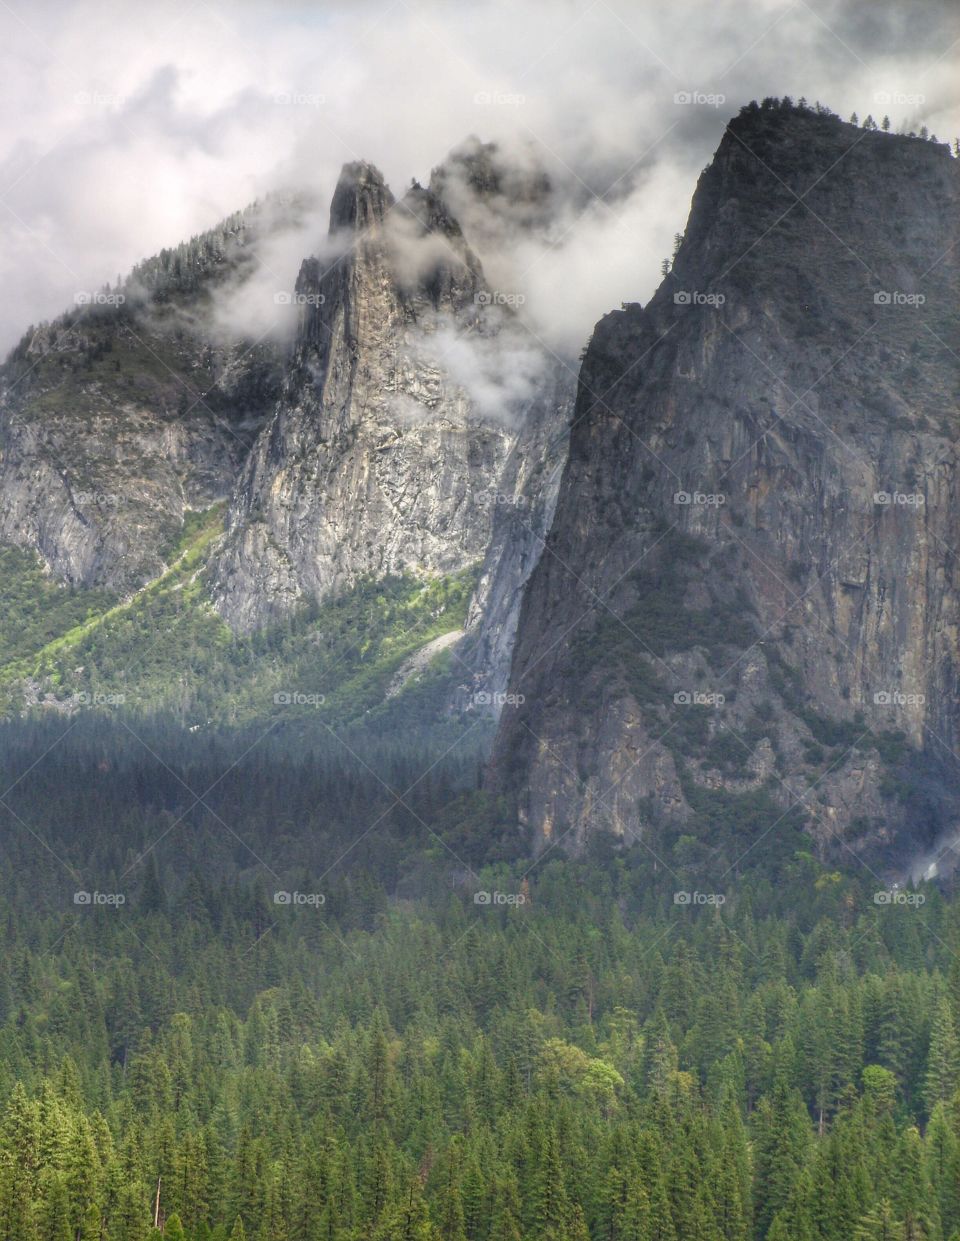 Yosemite national park is awesome - majestic forest and maintains